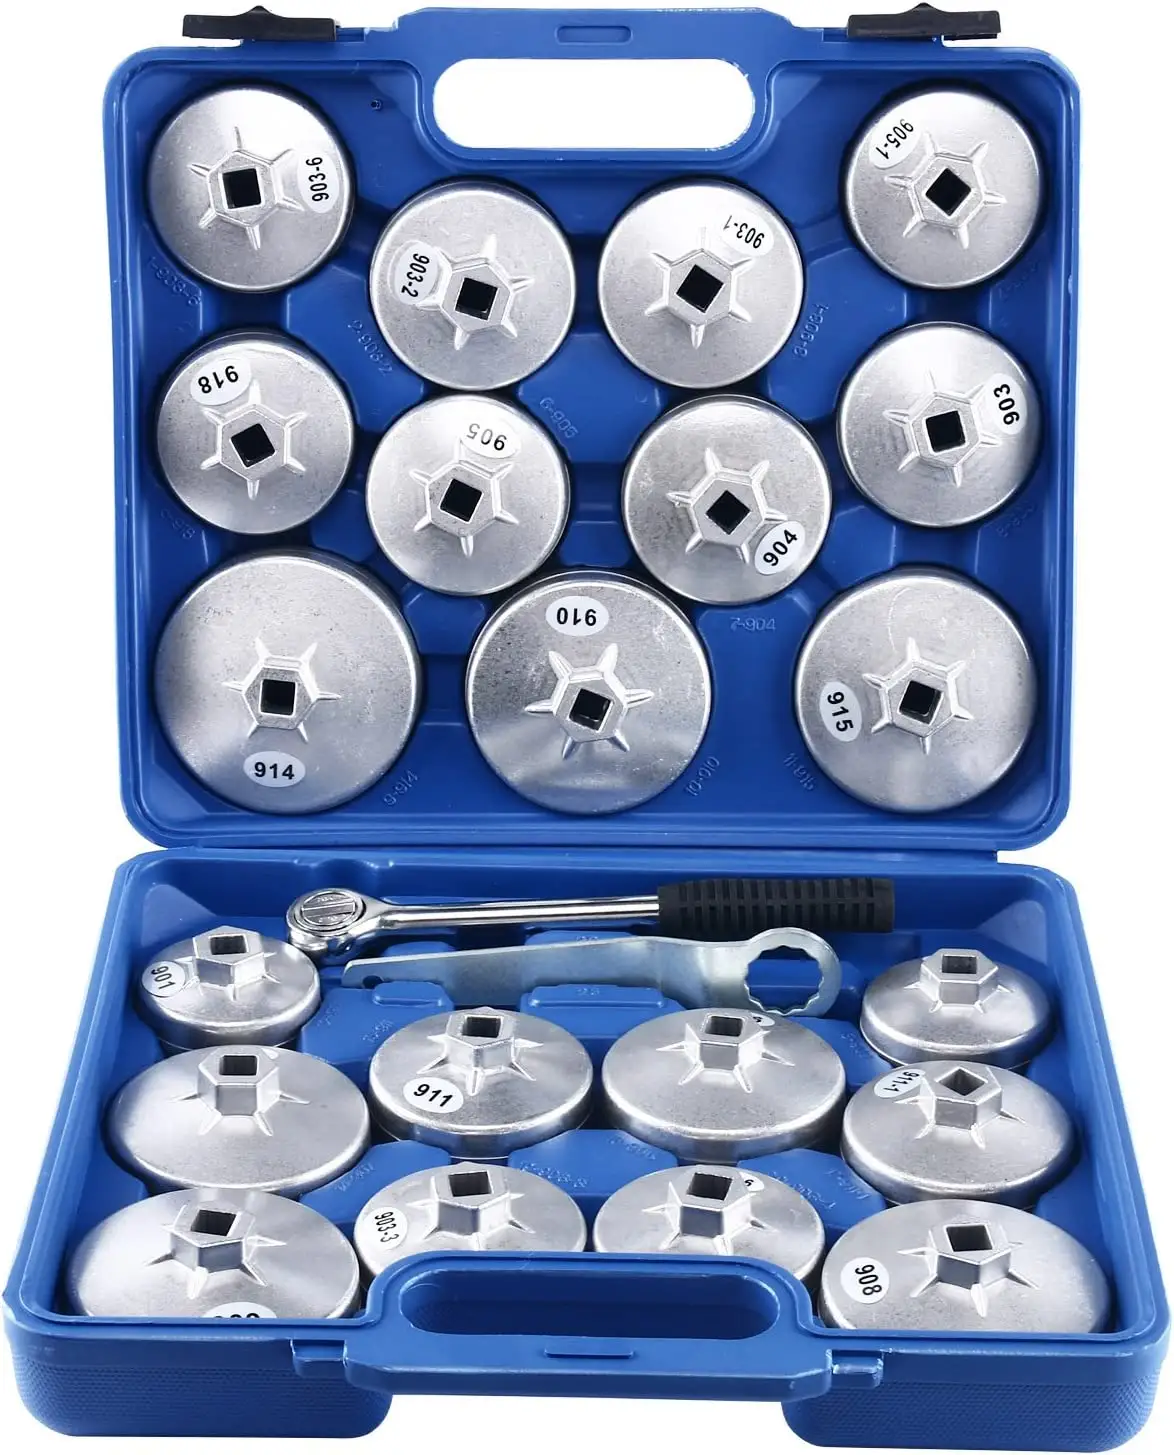 23pcs Cup Type Oil Filter Wrench Set Removal Tool Oil Filter Hat Wrench Set Vehicle Tools Oil Filter Wrench